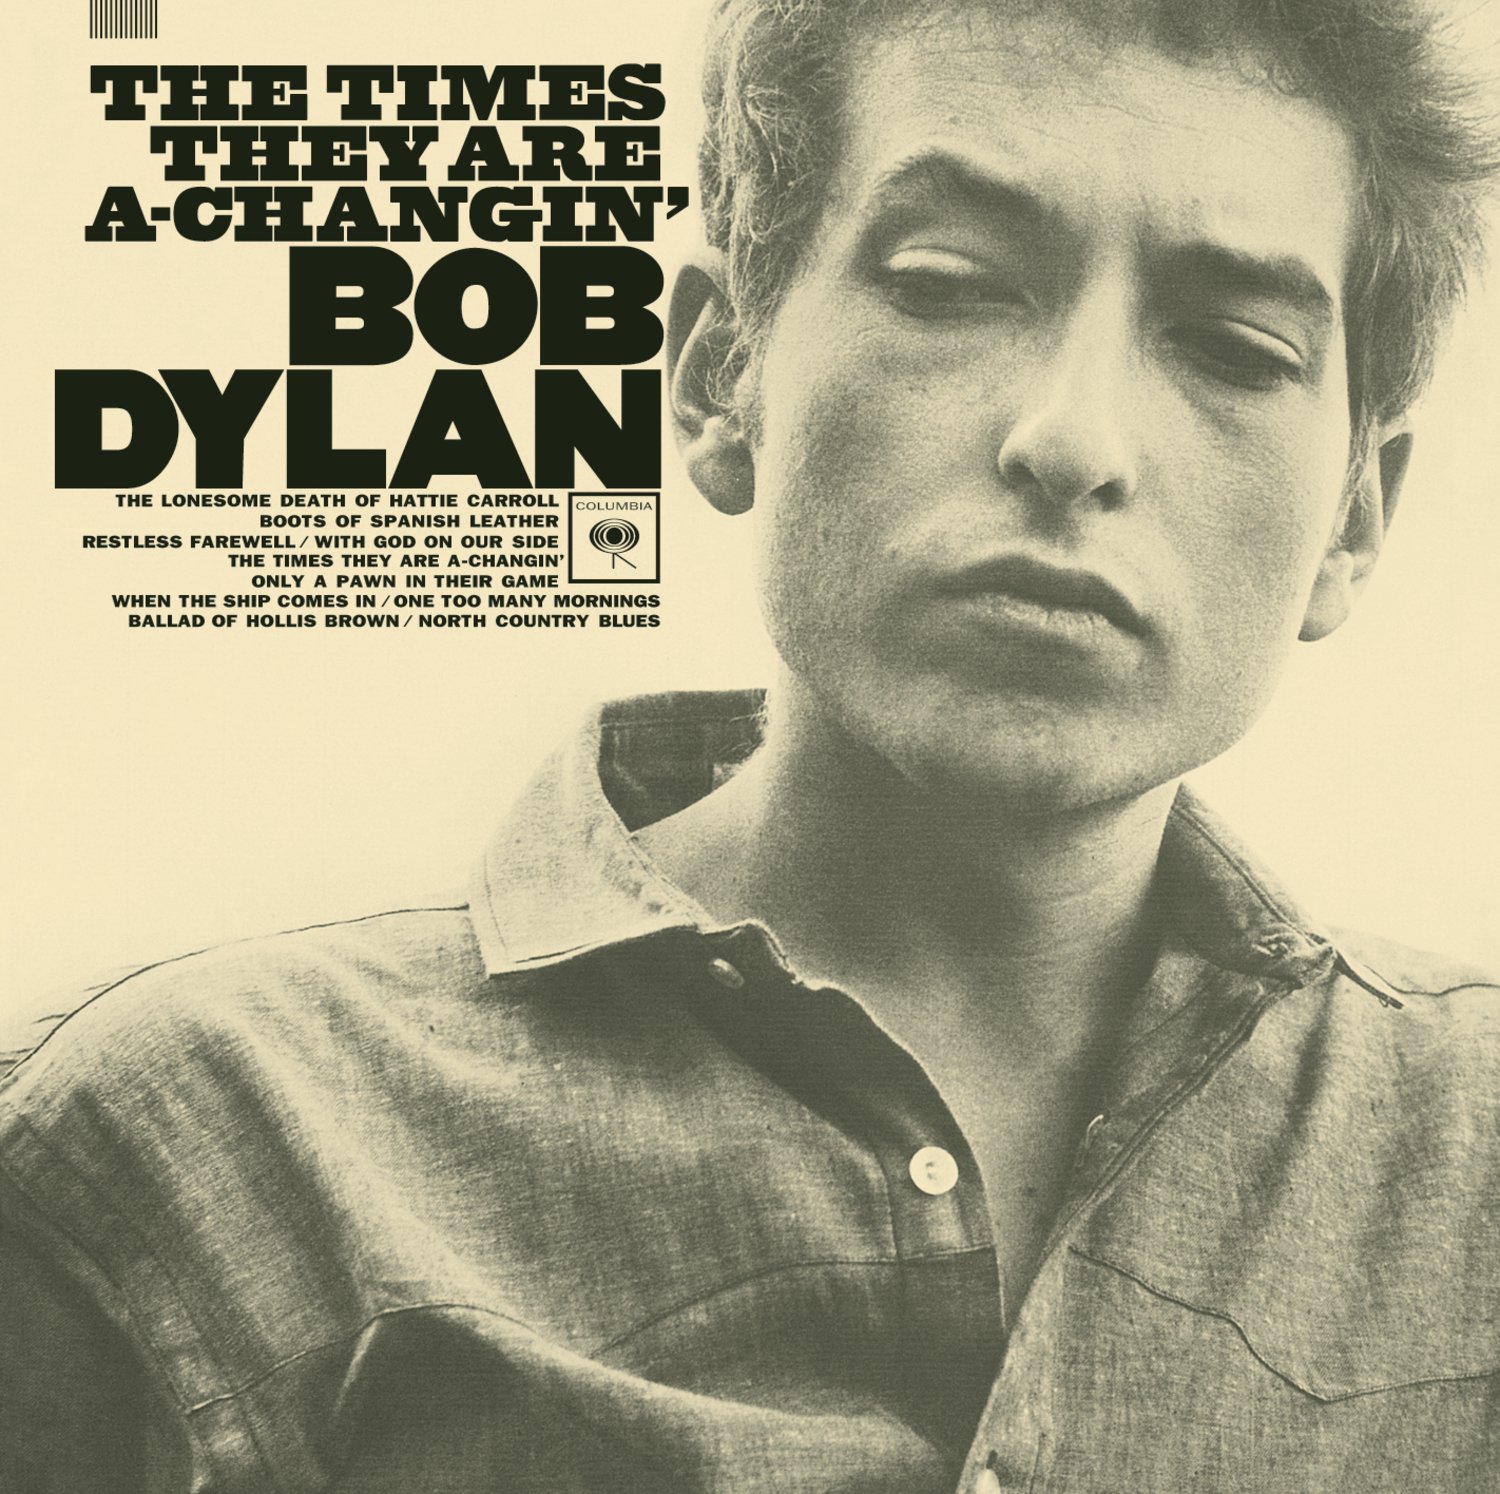 Bob Dylan - The Times They Are A-Changin’